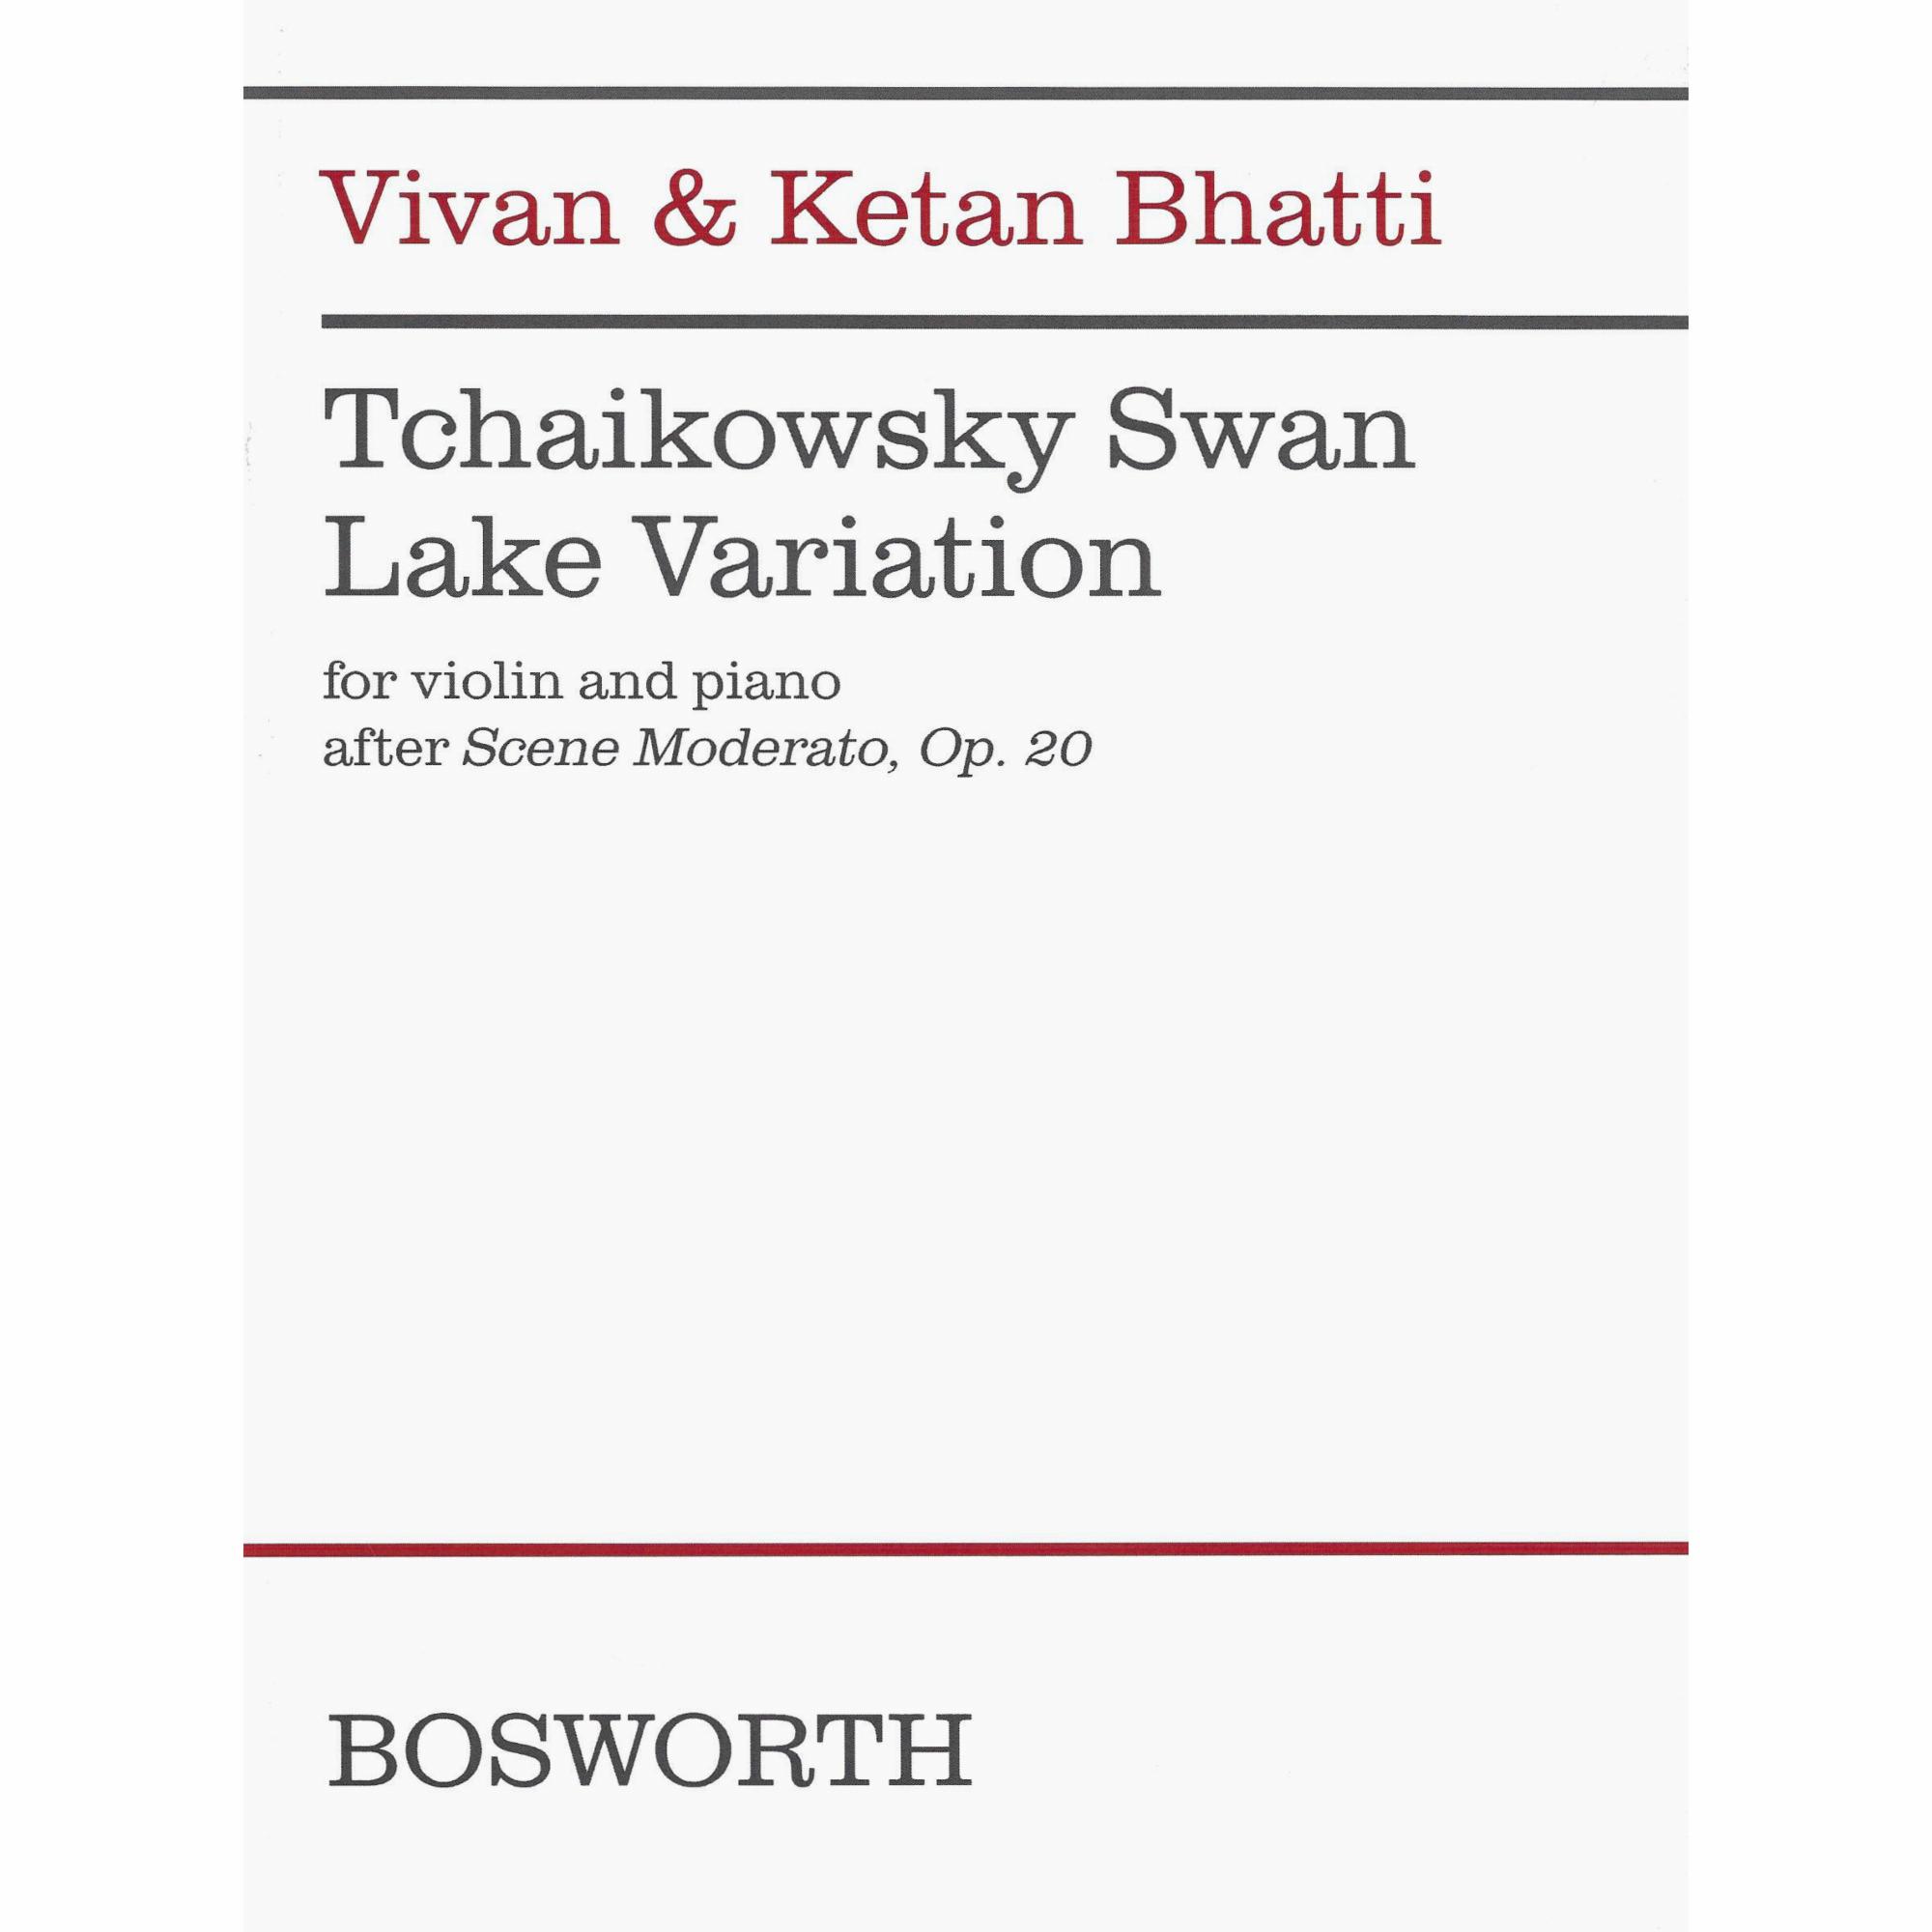 Bhatti -- Tchaikovsky Swan Lake Variation for Violin and Piano